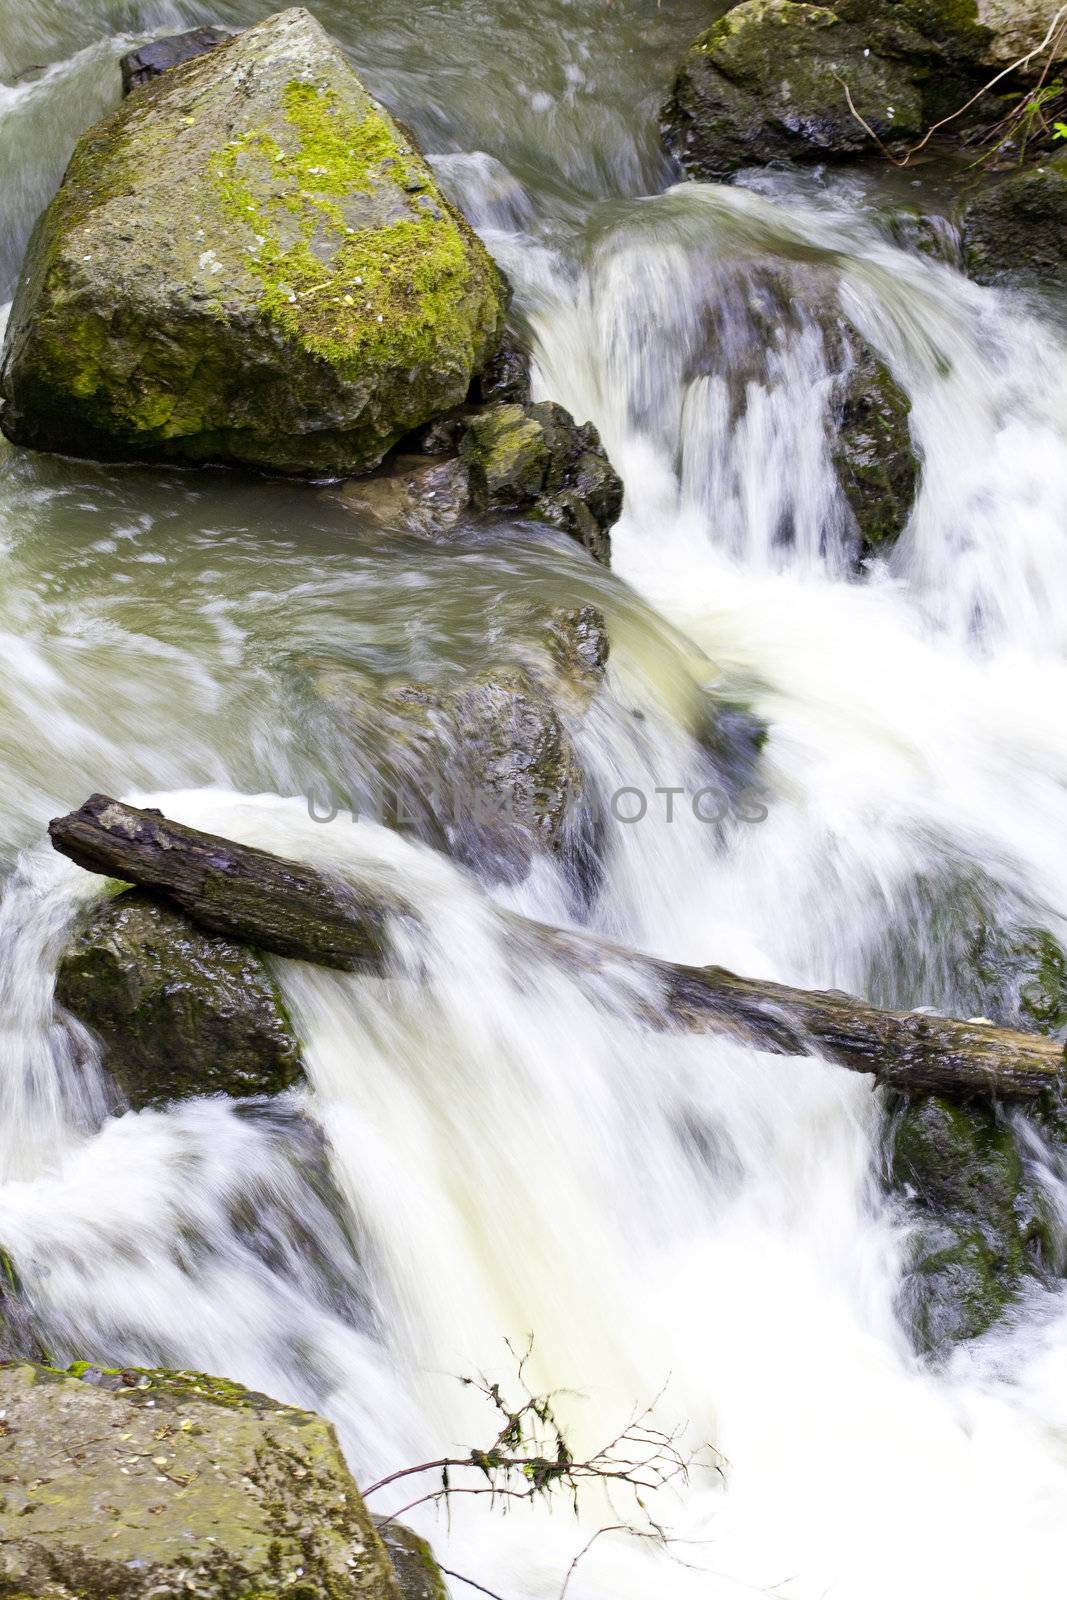 Water running in a mountain creek by jannyjus